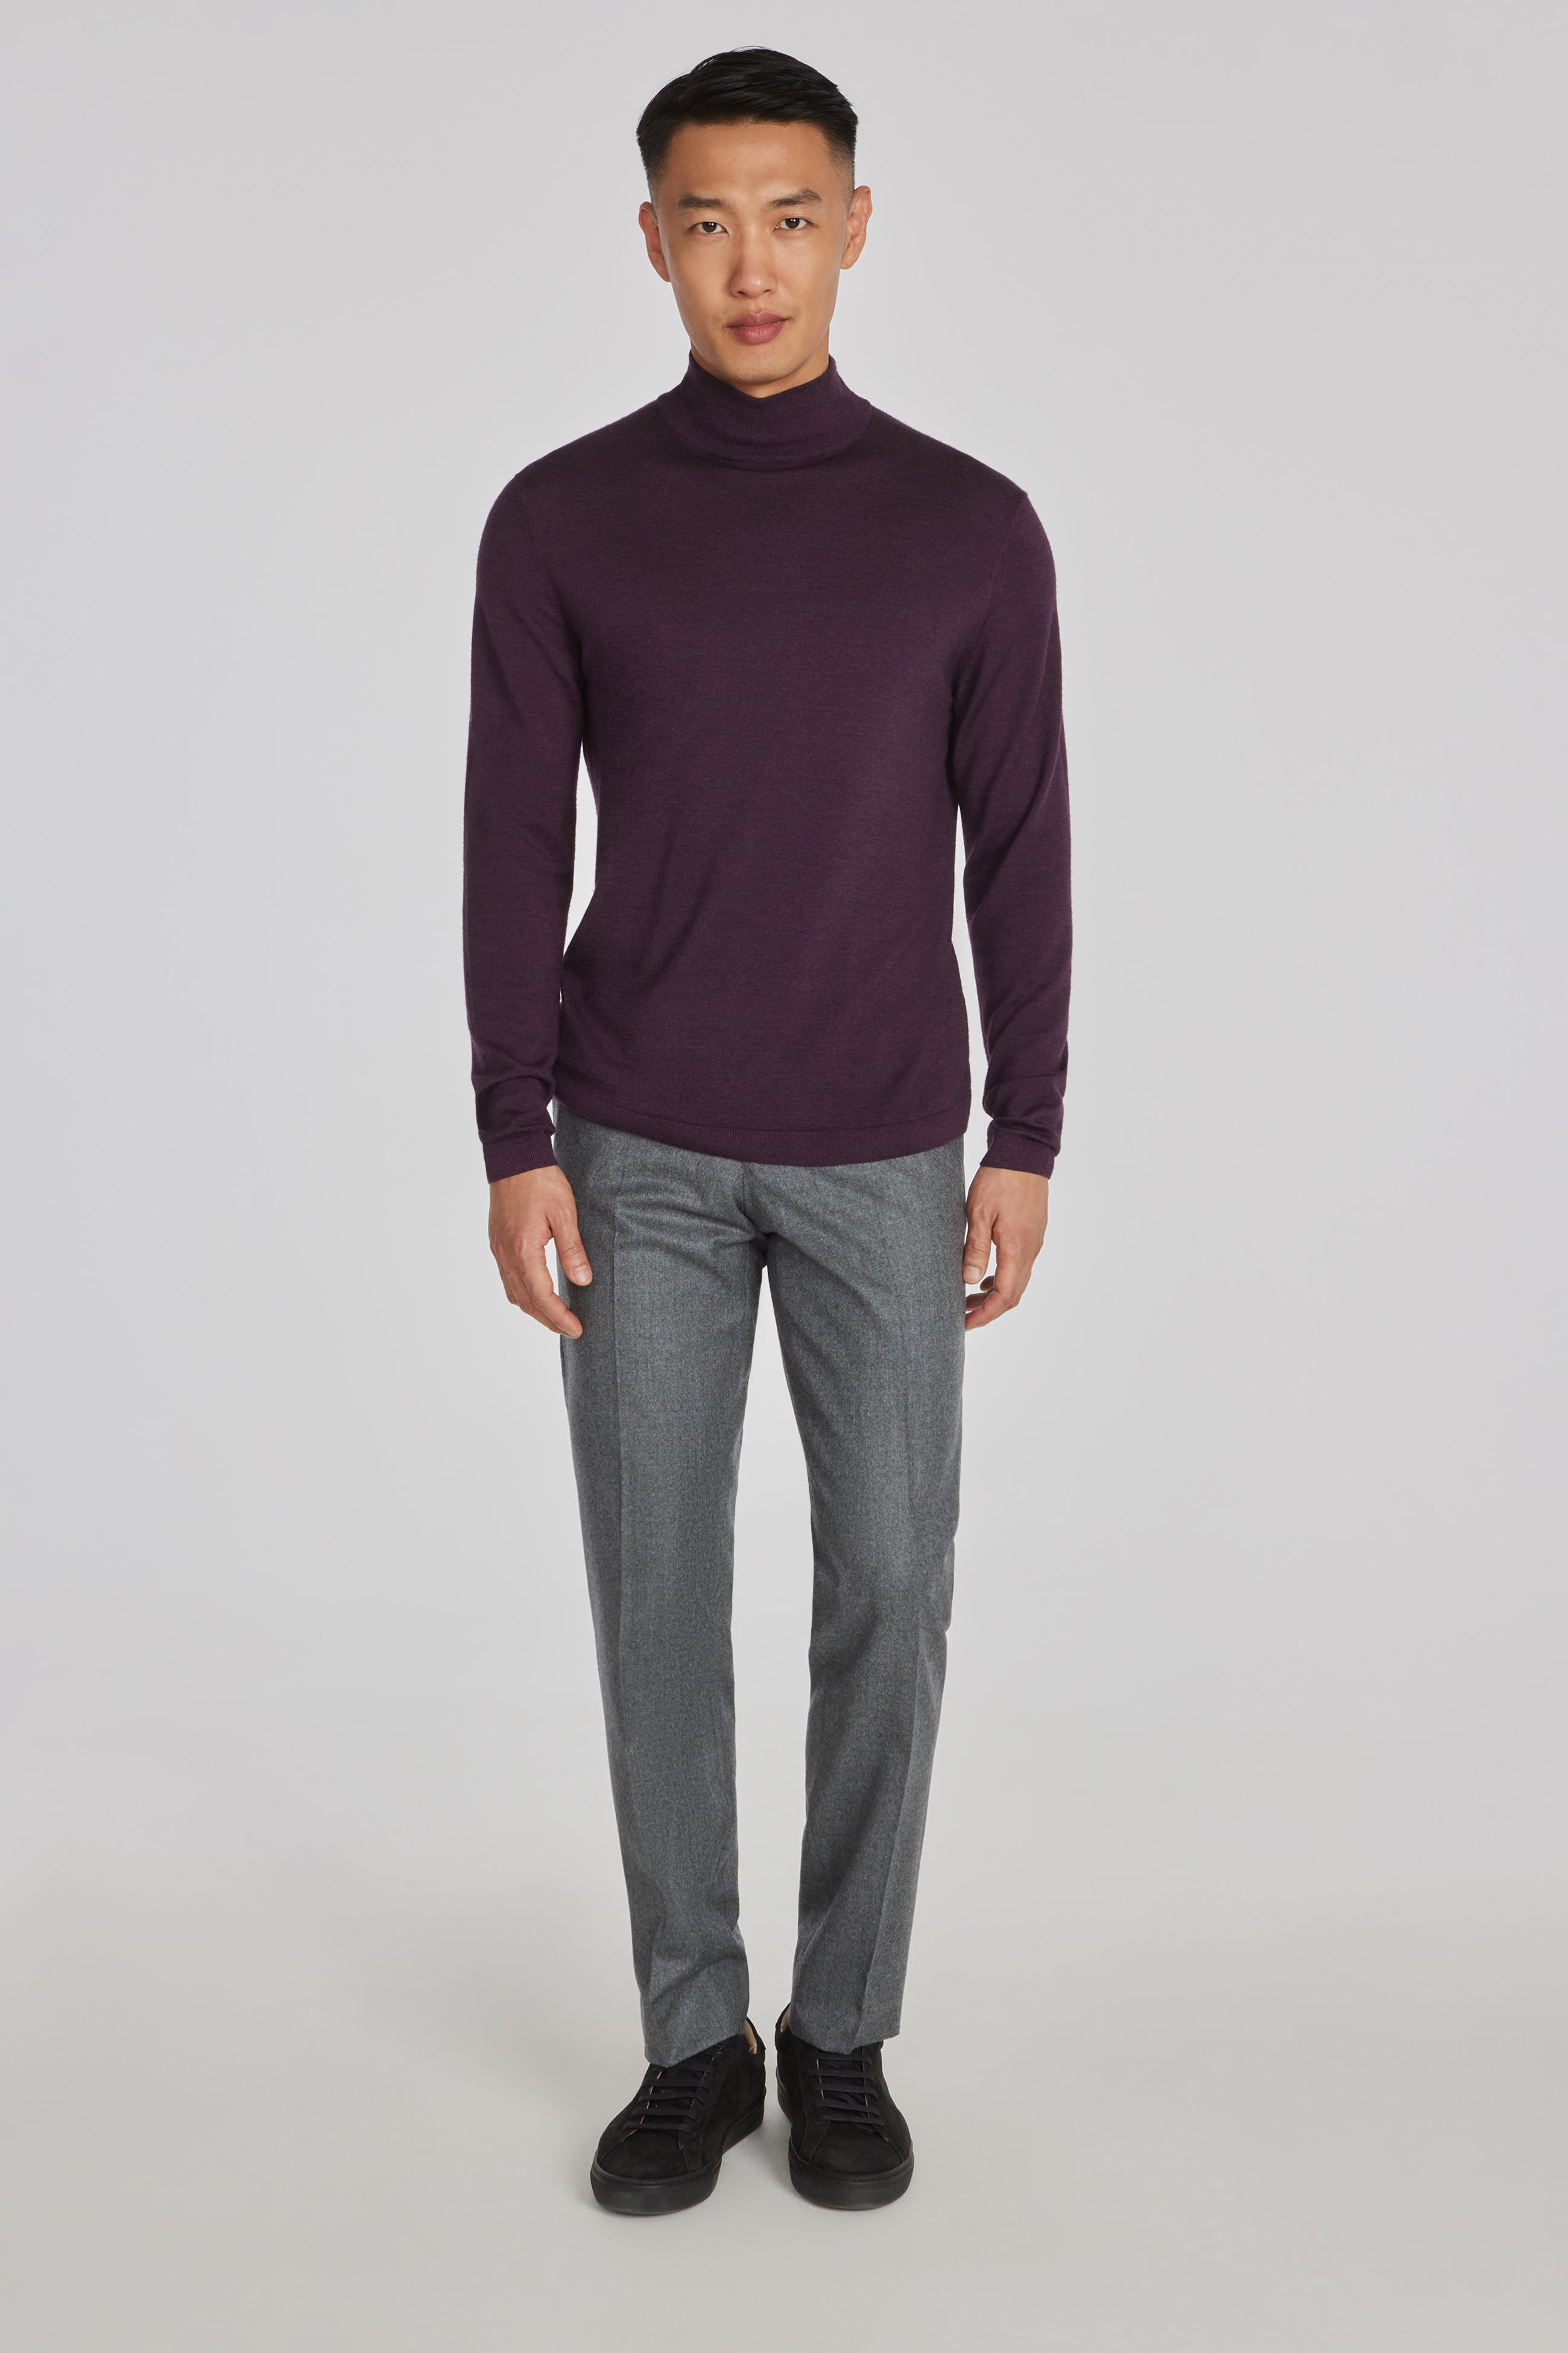 Alt view 2 Beaudry Wool, Silk and Cashmere Mock Neck Sweater in Plum